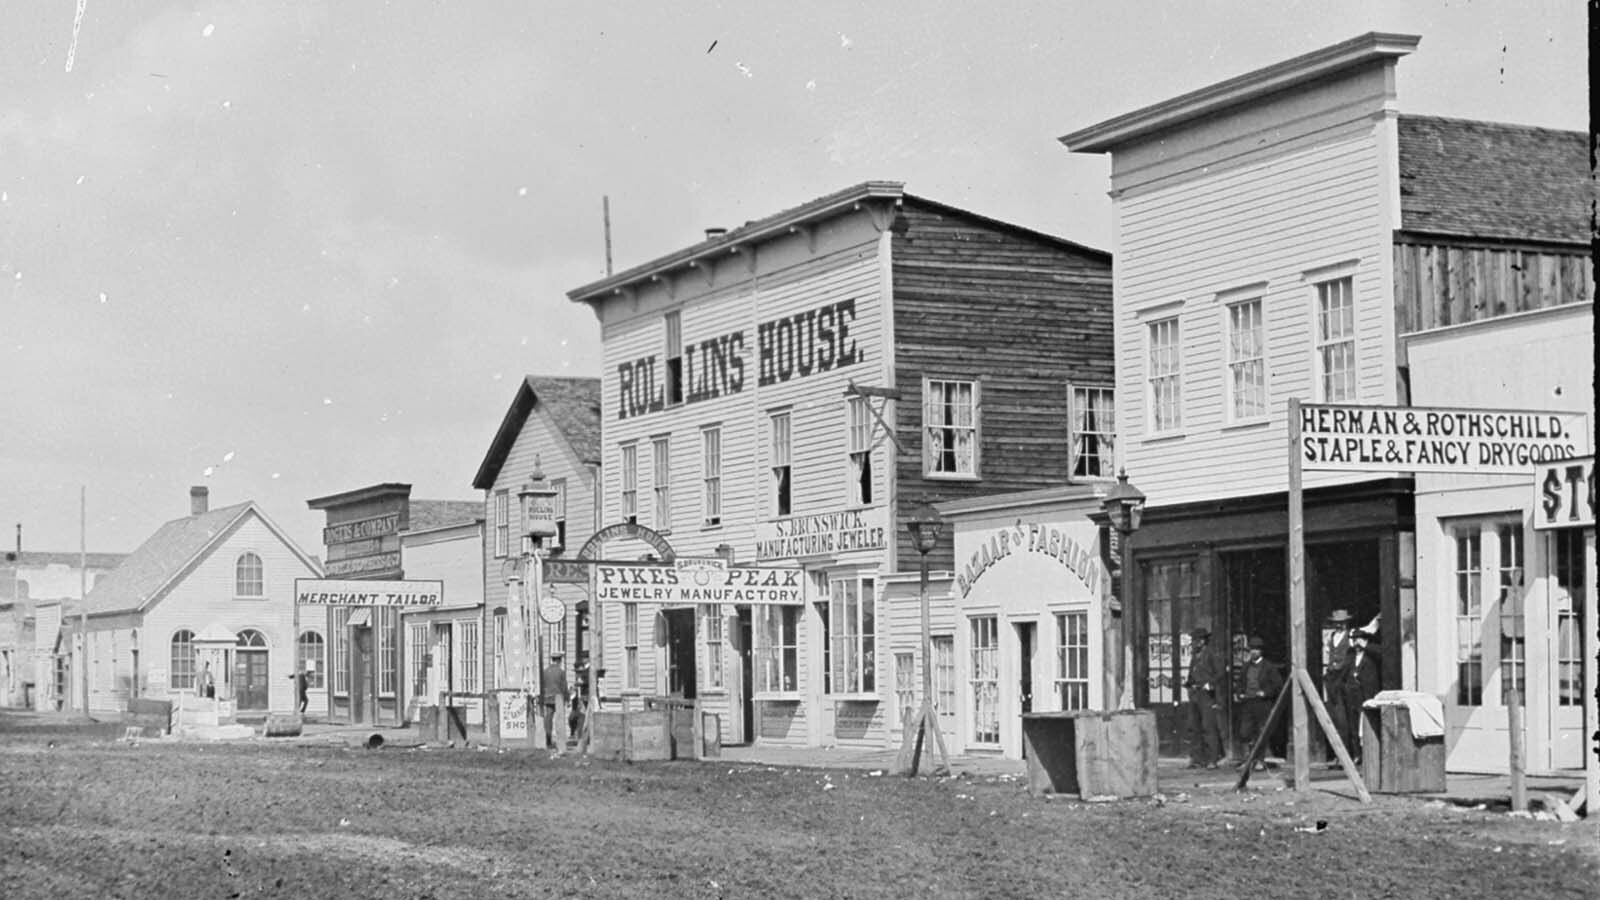 In the early days of Cheyenne, Rollins House was a destination as a proper hotel in what was mostly a tent city.